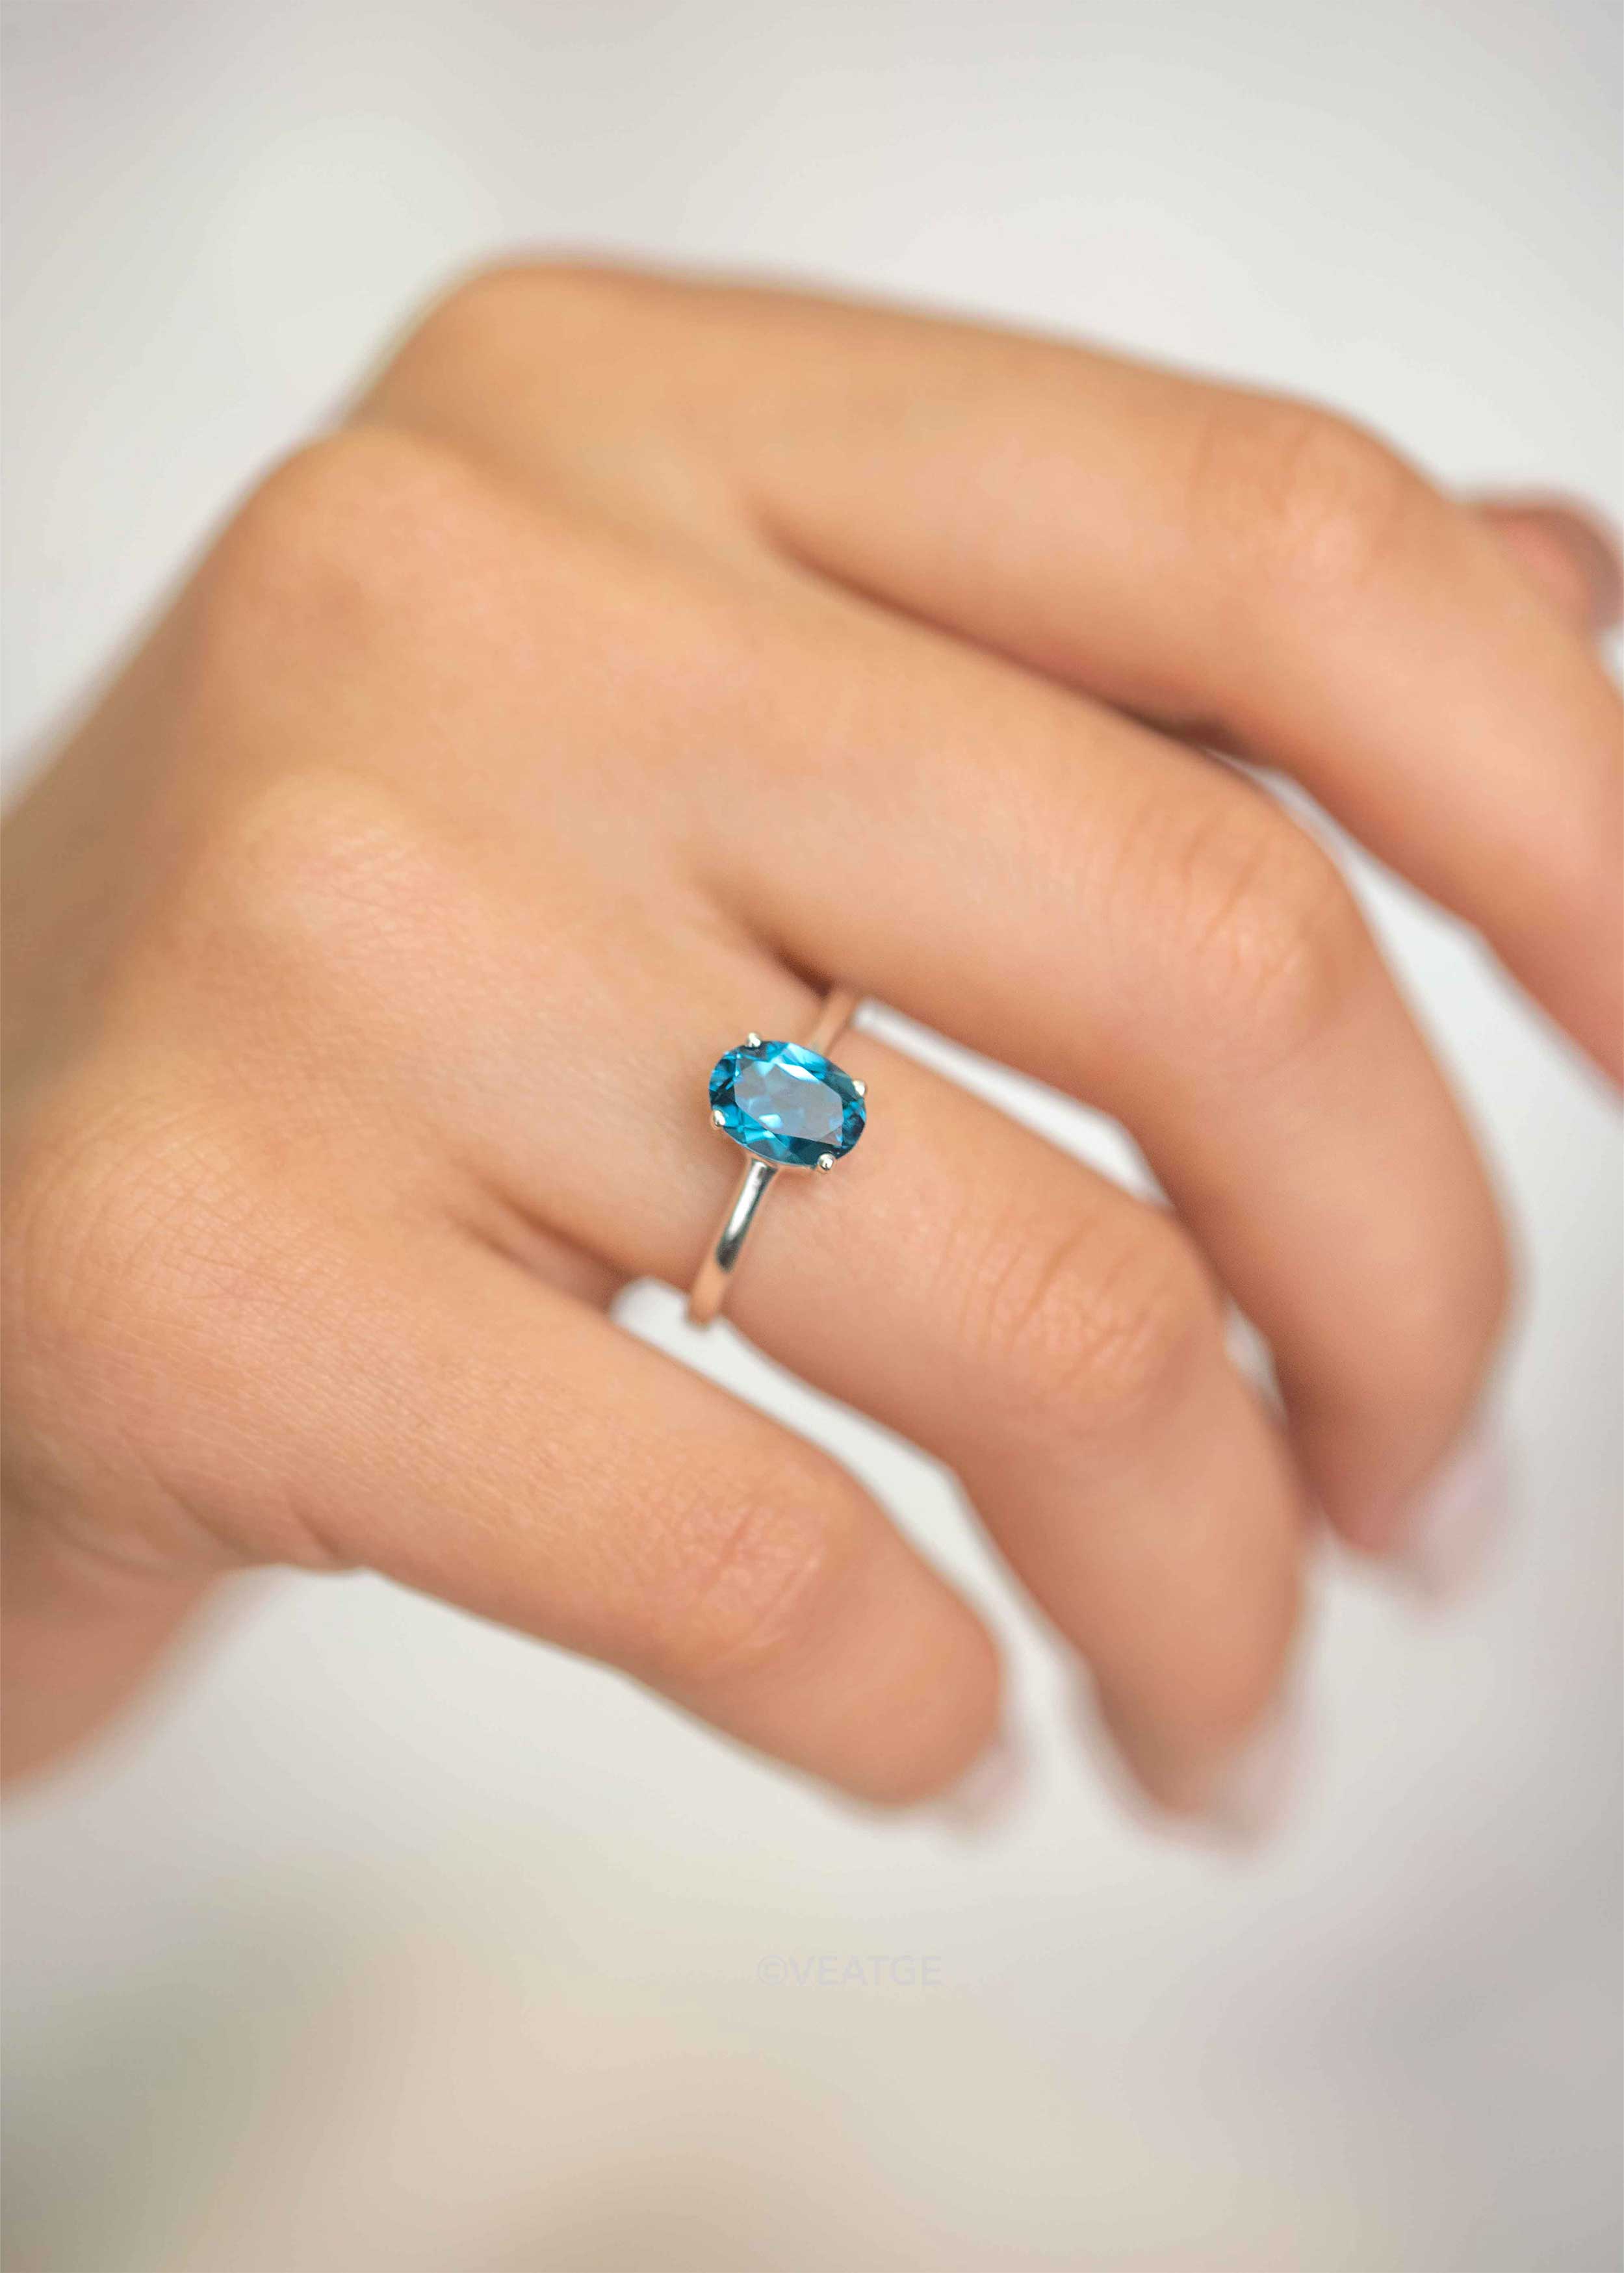 Genuine London Blue Topaz Ring in 925 Sterling Silver, Handmade Oval Solitaire Rings, Gifts for Women